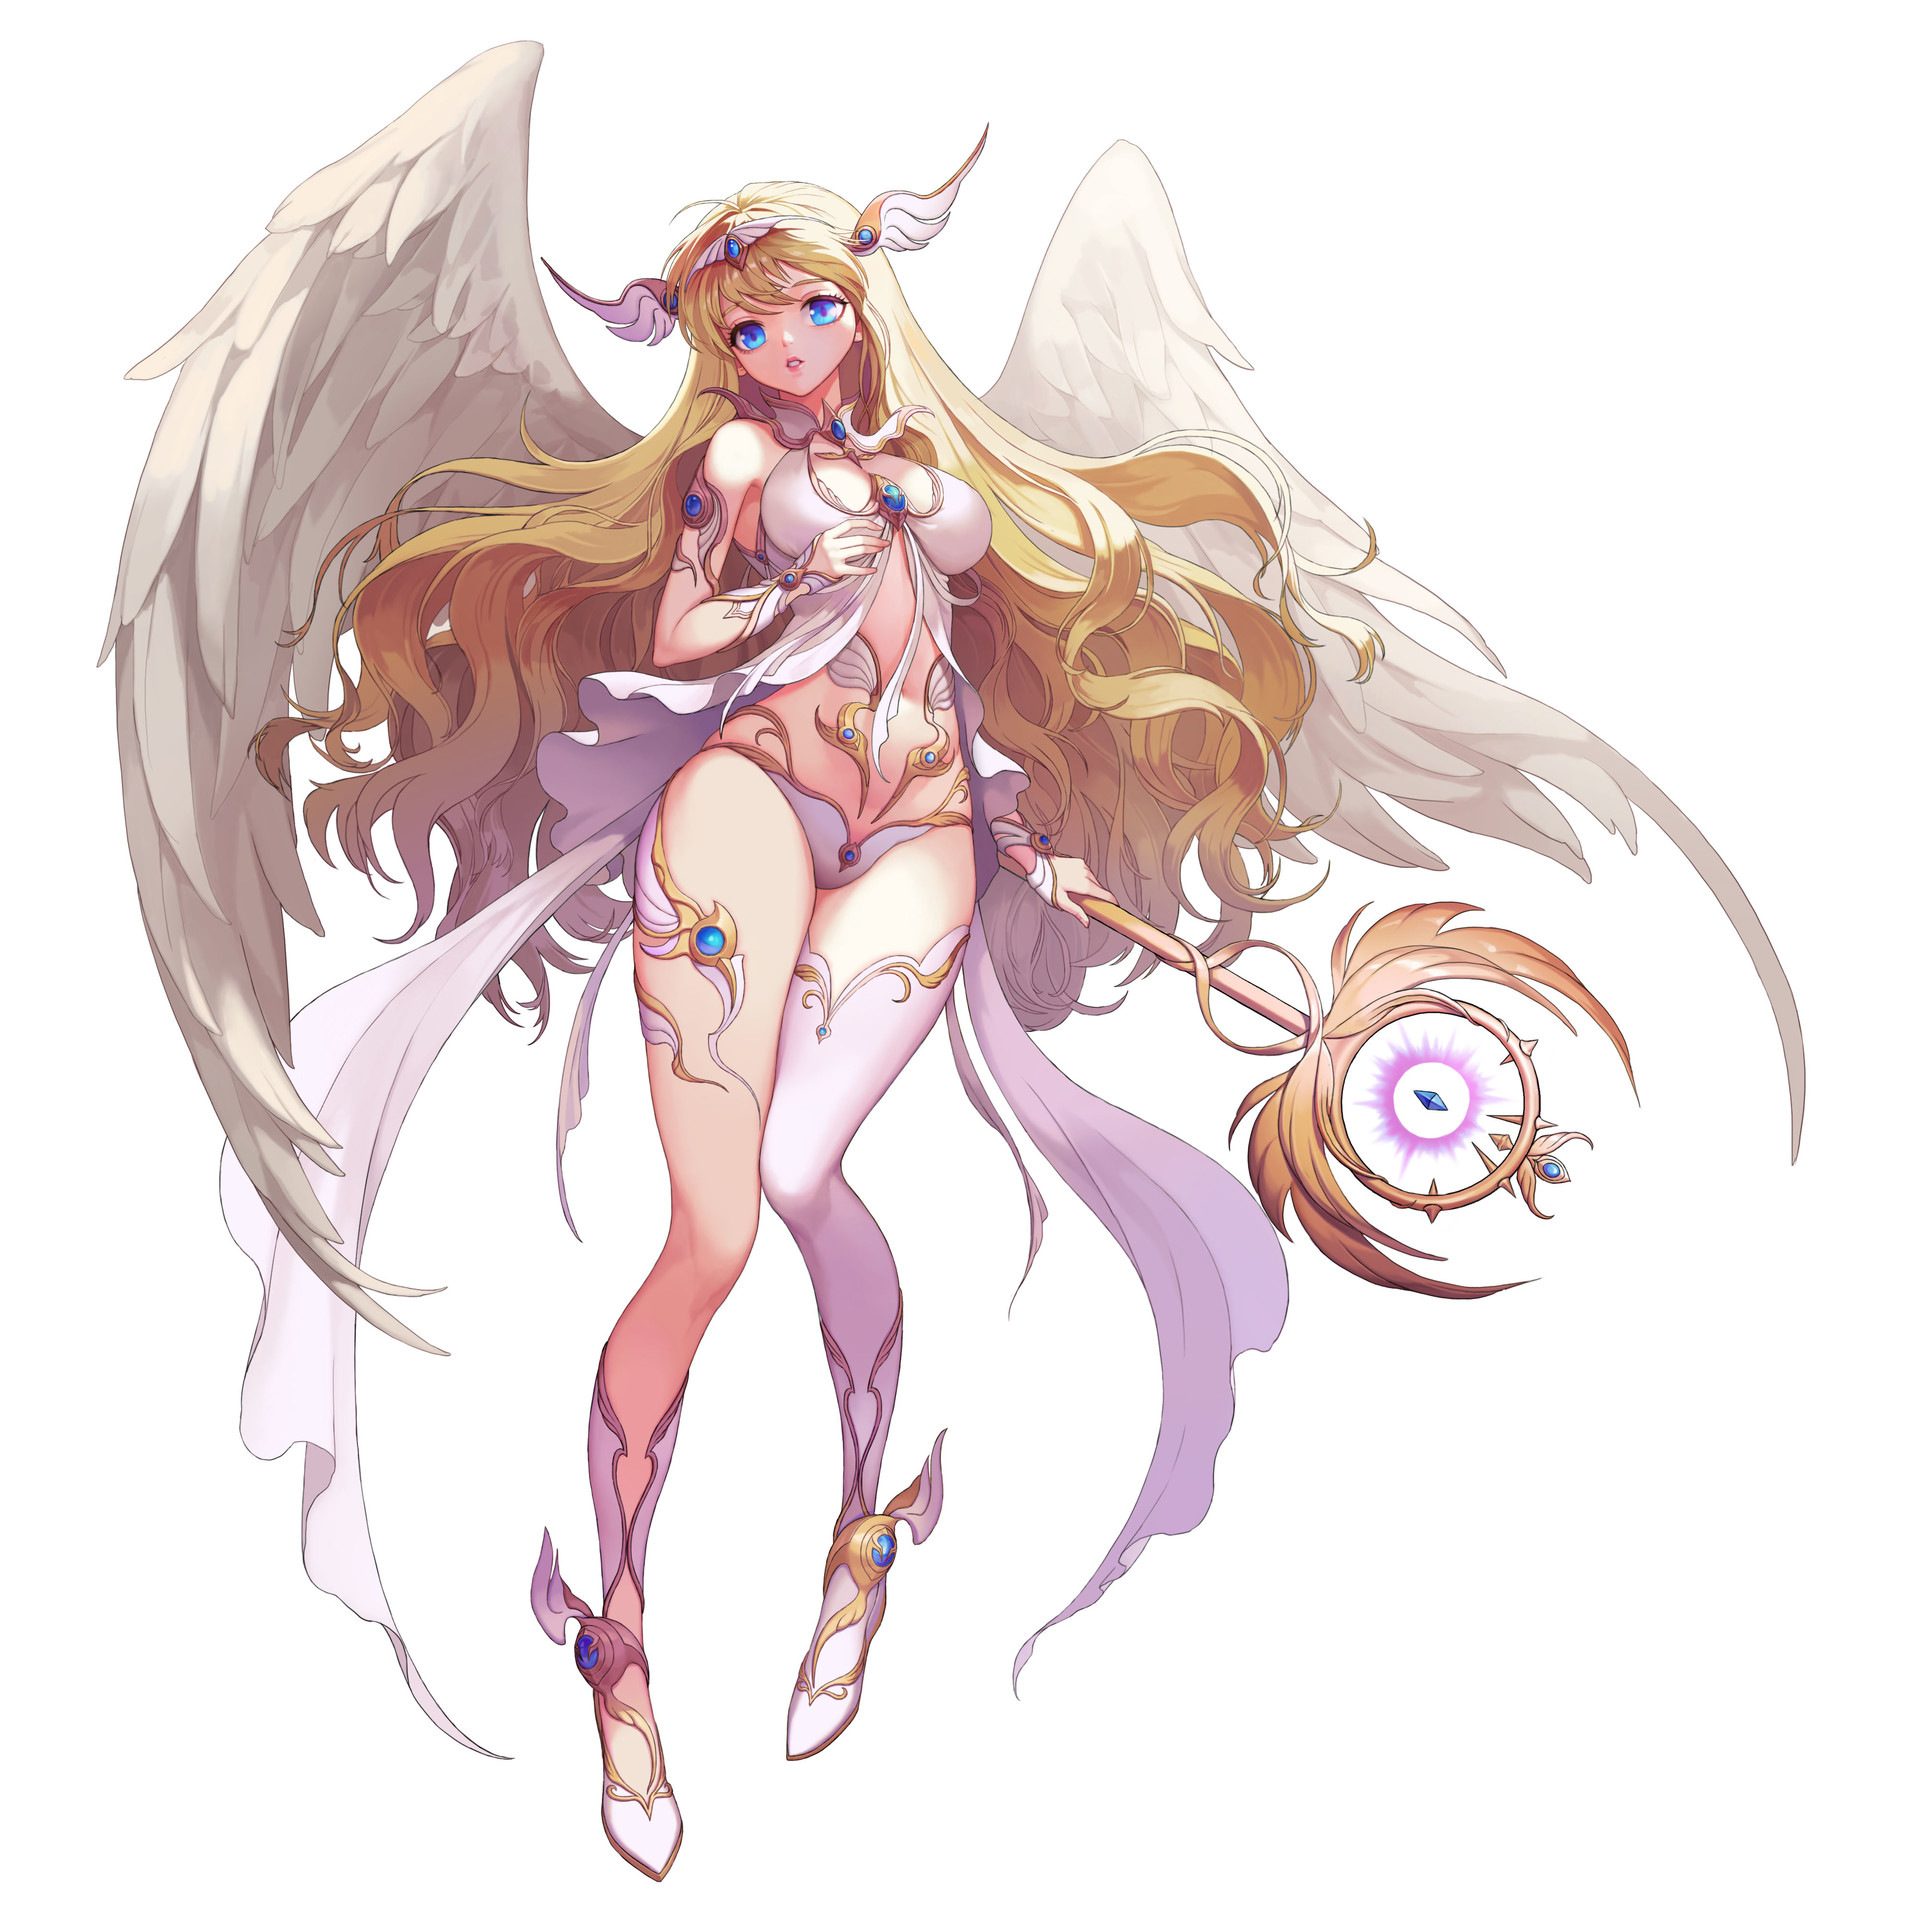 Anime 1920x1920 Minsook An drawing women blonde hair accessories skimpy clothes white clothing staff flying wings feathers simple background white background blue eyes